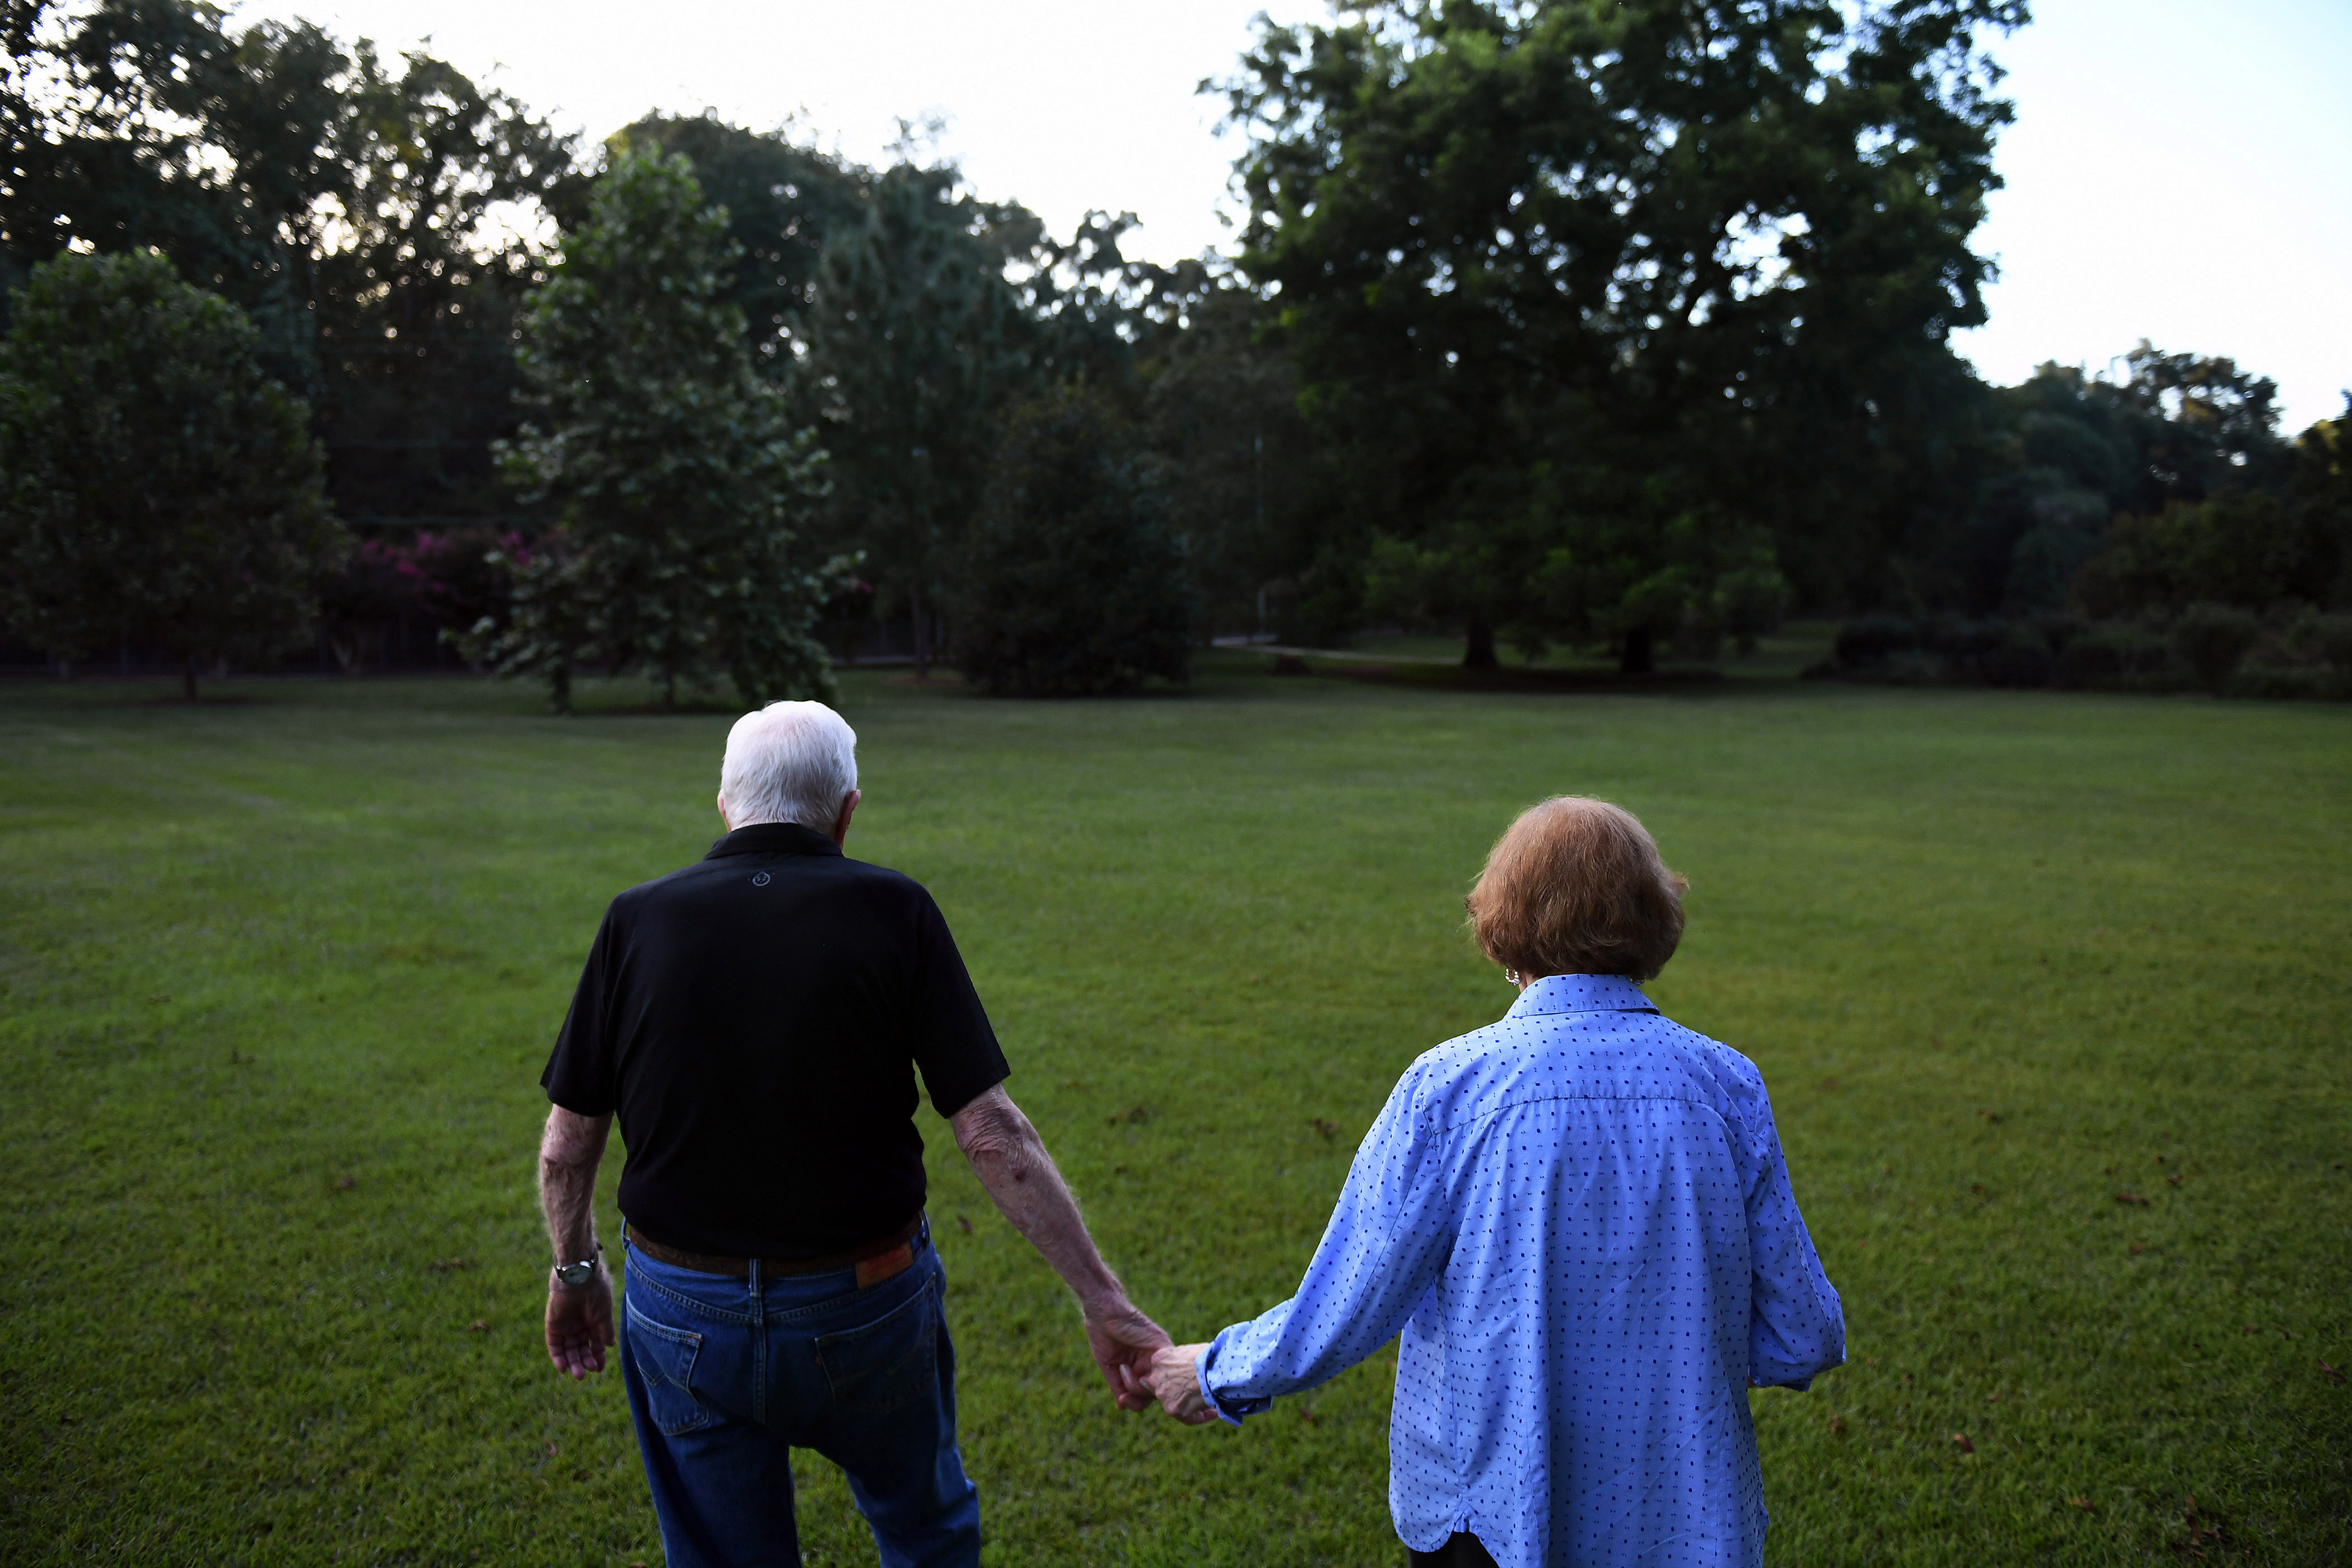 Jimmy Carter and Rosalynn Carter walk at a friend's home on Saturday August 04, 2018 in Plains, GA | Source: Getty Images